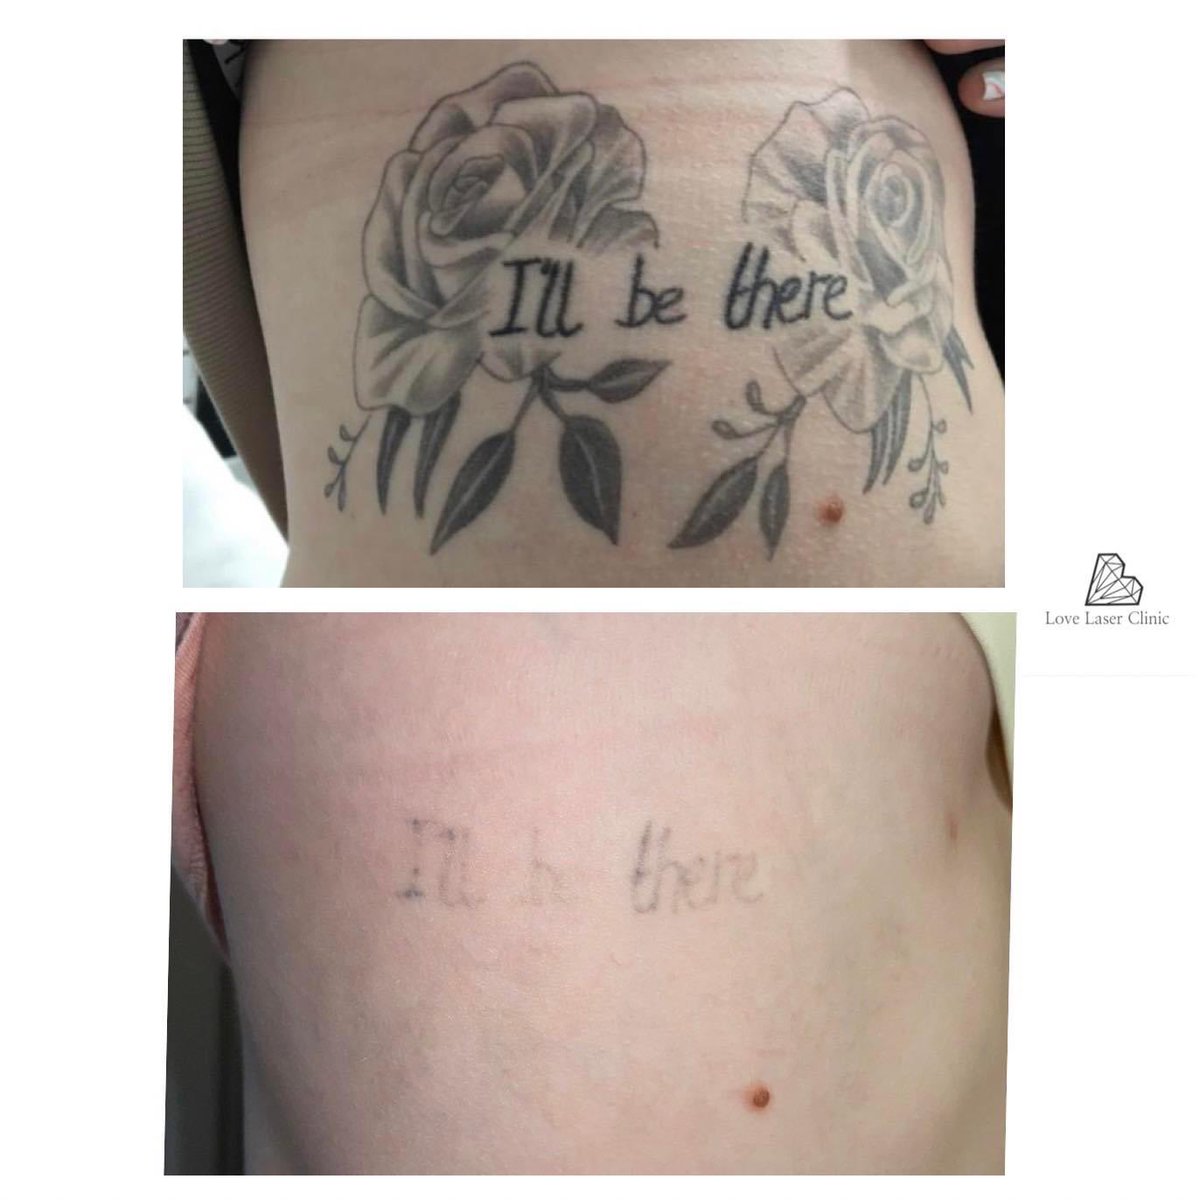 Six sessions of laser tattoo removal, has almost eradicated this black tummy tattoo
 🙌 

#tattoos #beforeandafter #lasertattooremoval #tattooremoval #unwantedink #nottingham #aftercare #lovelaserclinic